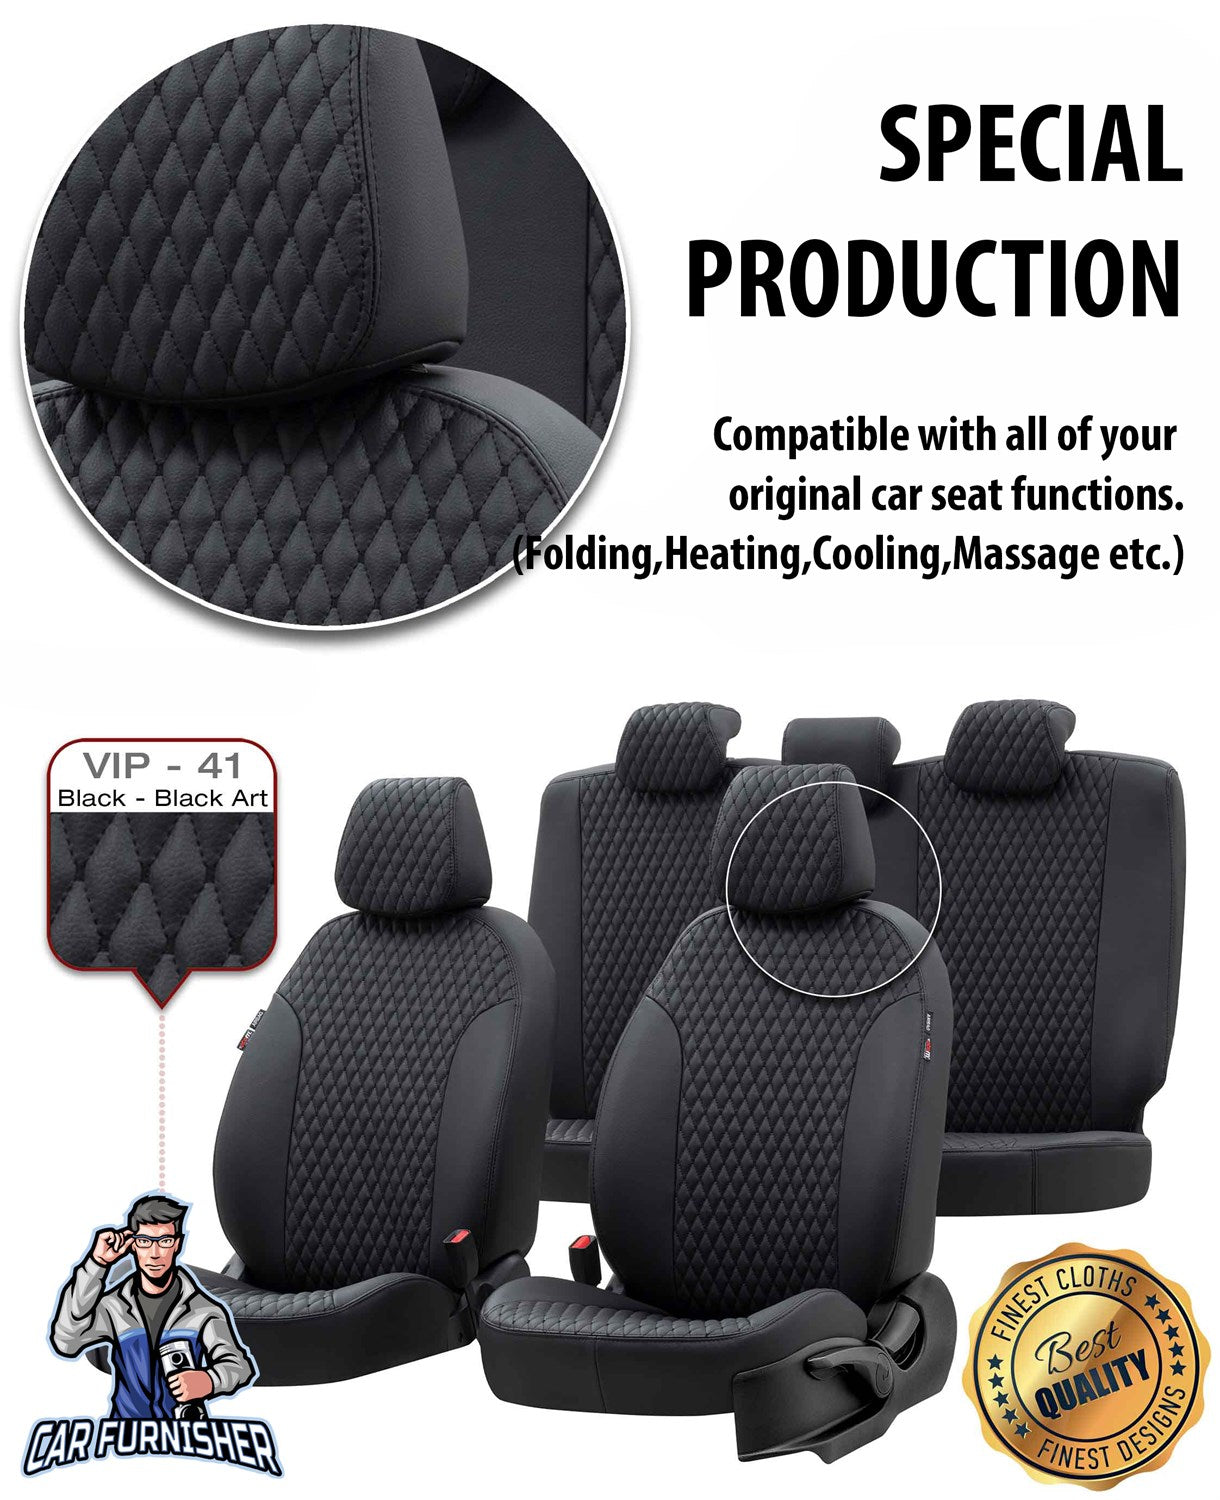 Audi Q2 Seat Cover Amsterdam Leather Design Smoked Black Leather